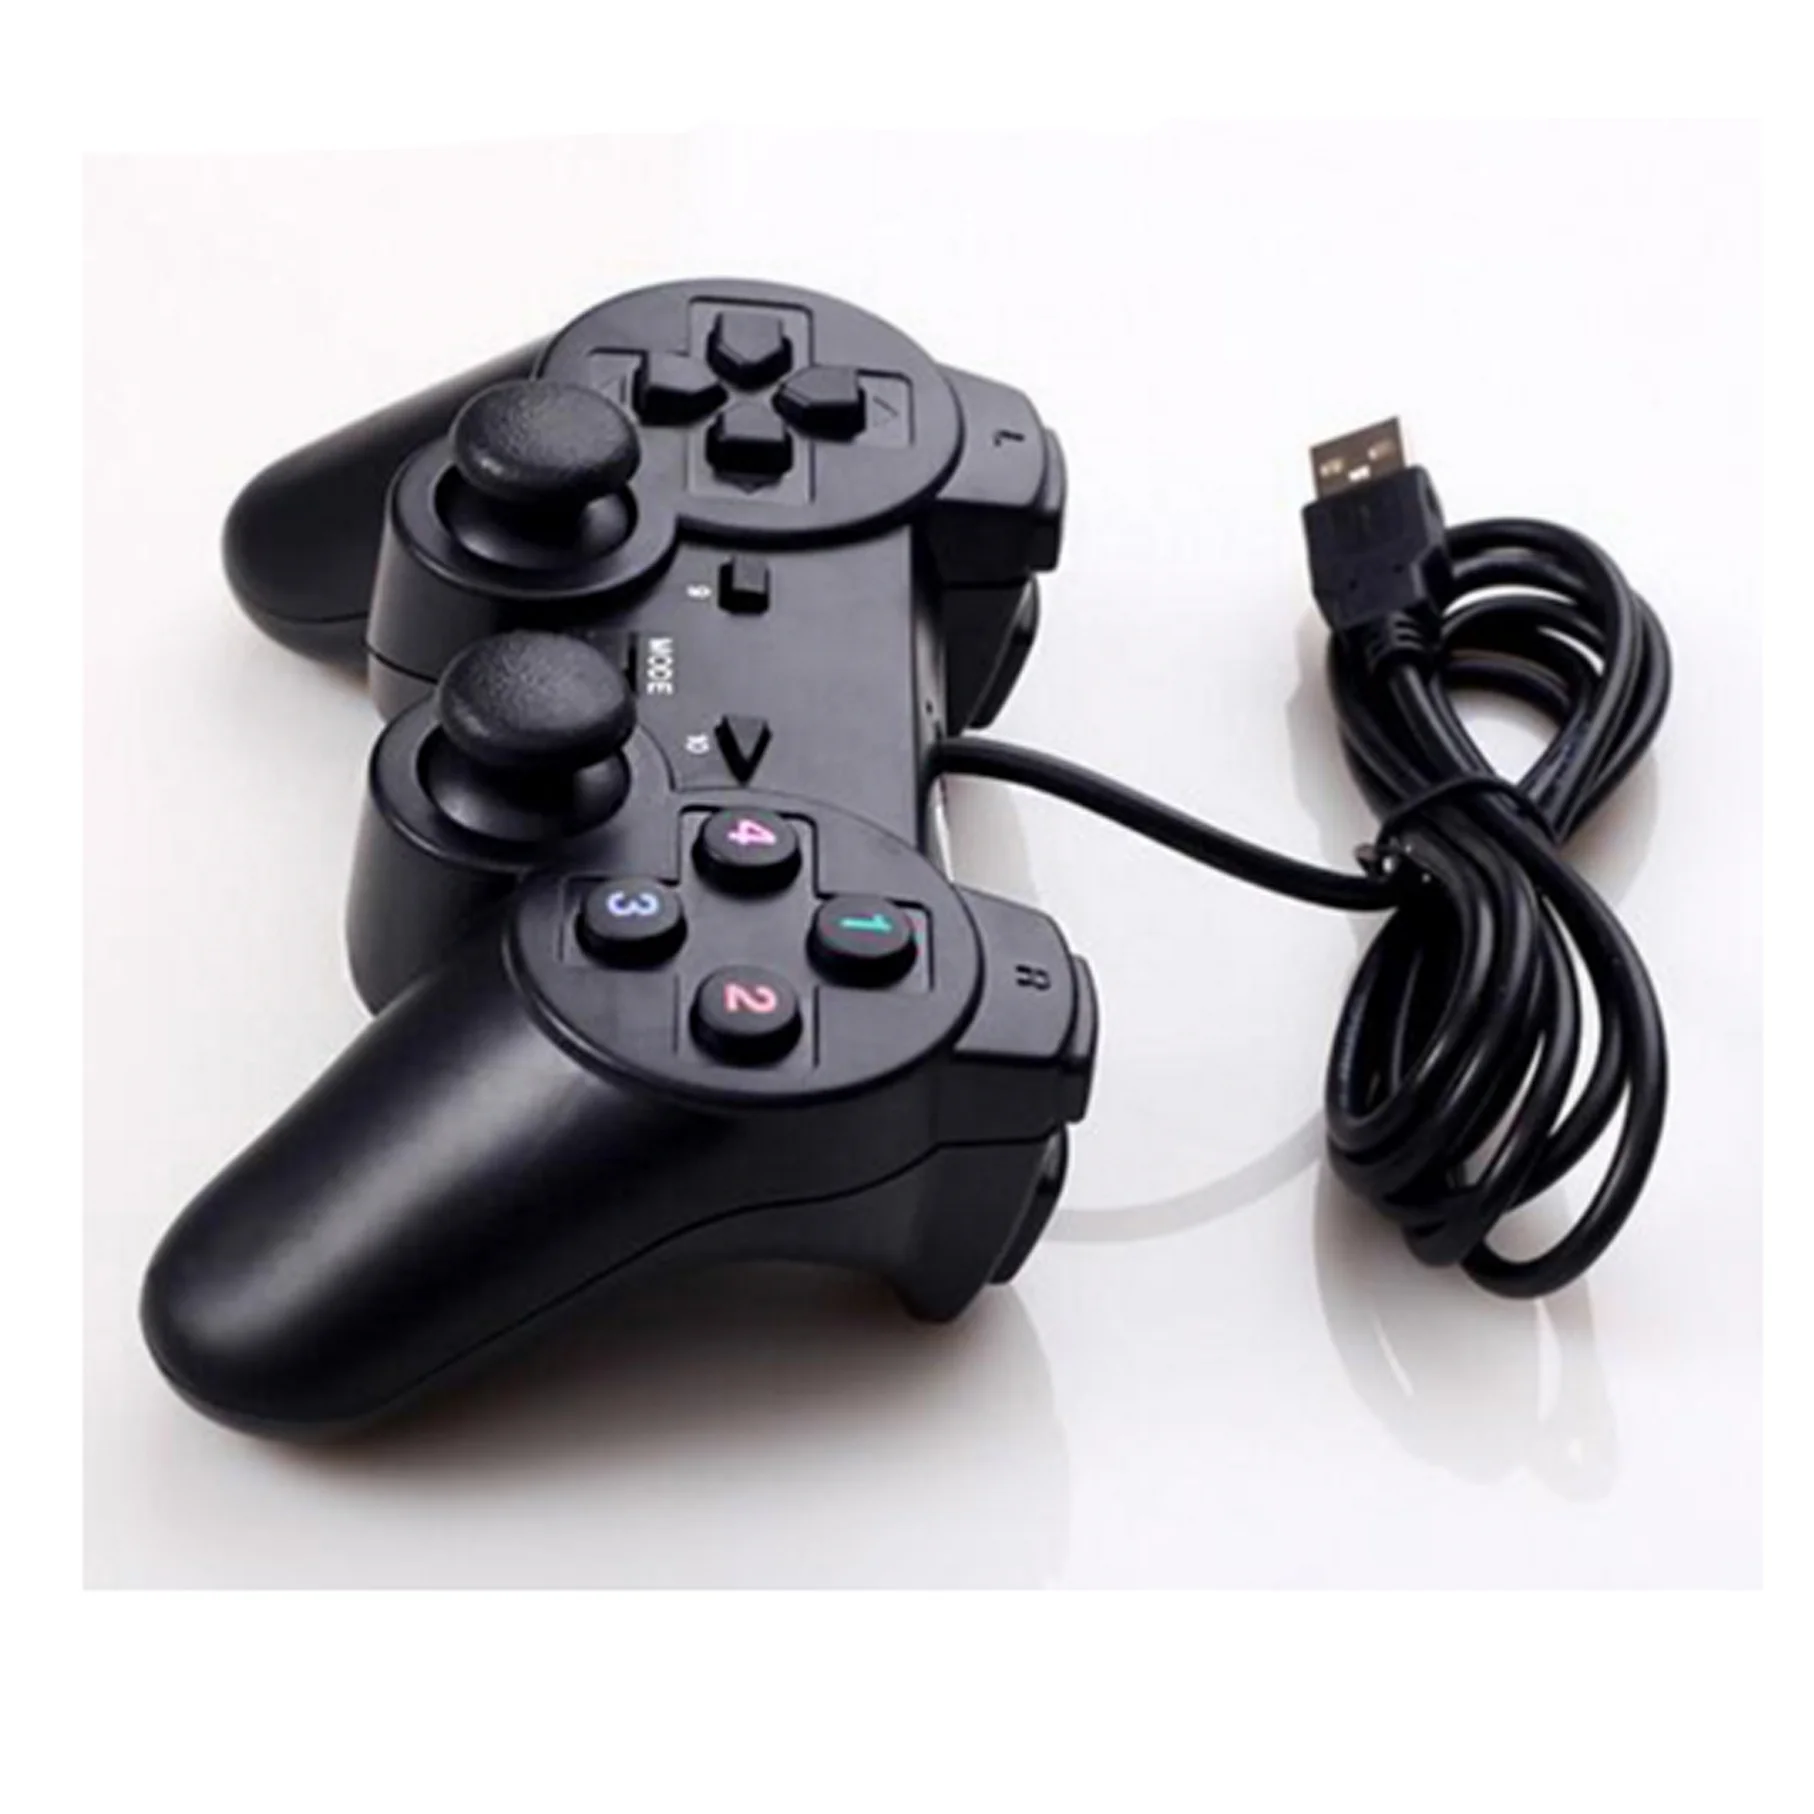 Controller wired Gamepad for Sony PlayStation2 ps2 Pad Replacement From m.alibaba.com